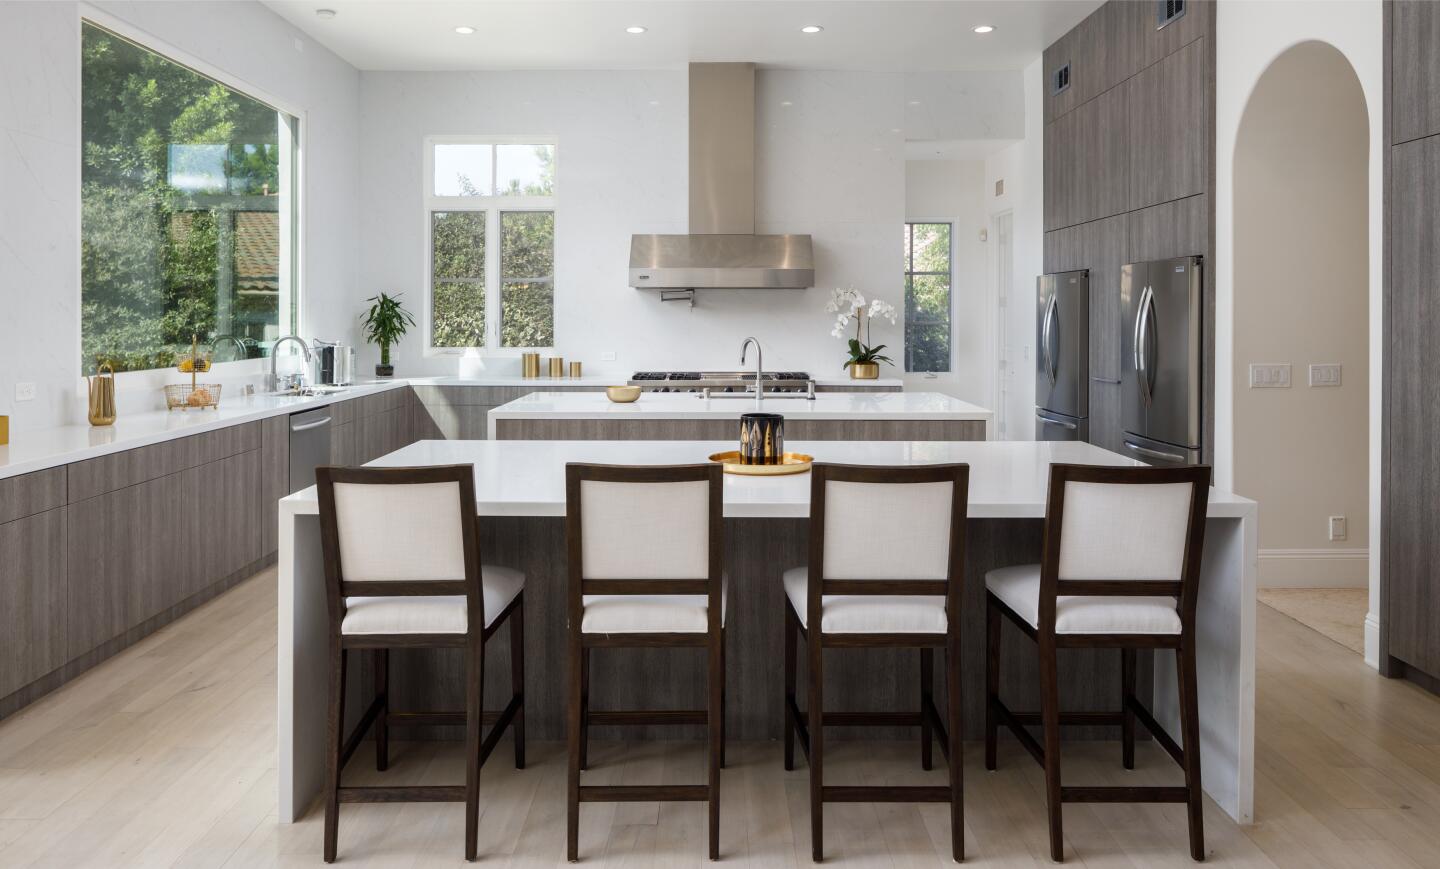 Seating for four at one of two kitchen islands.